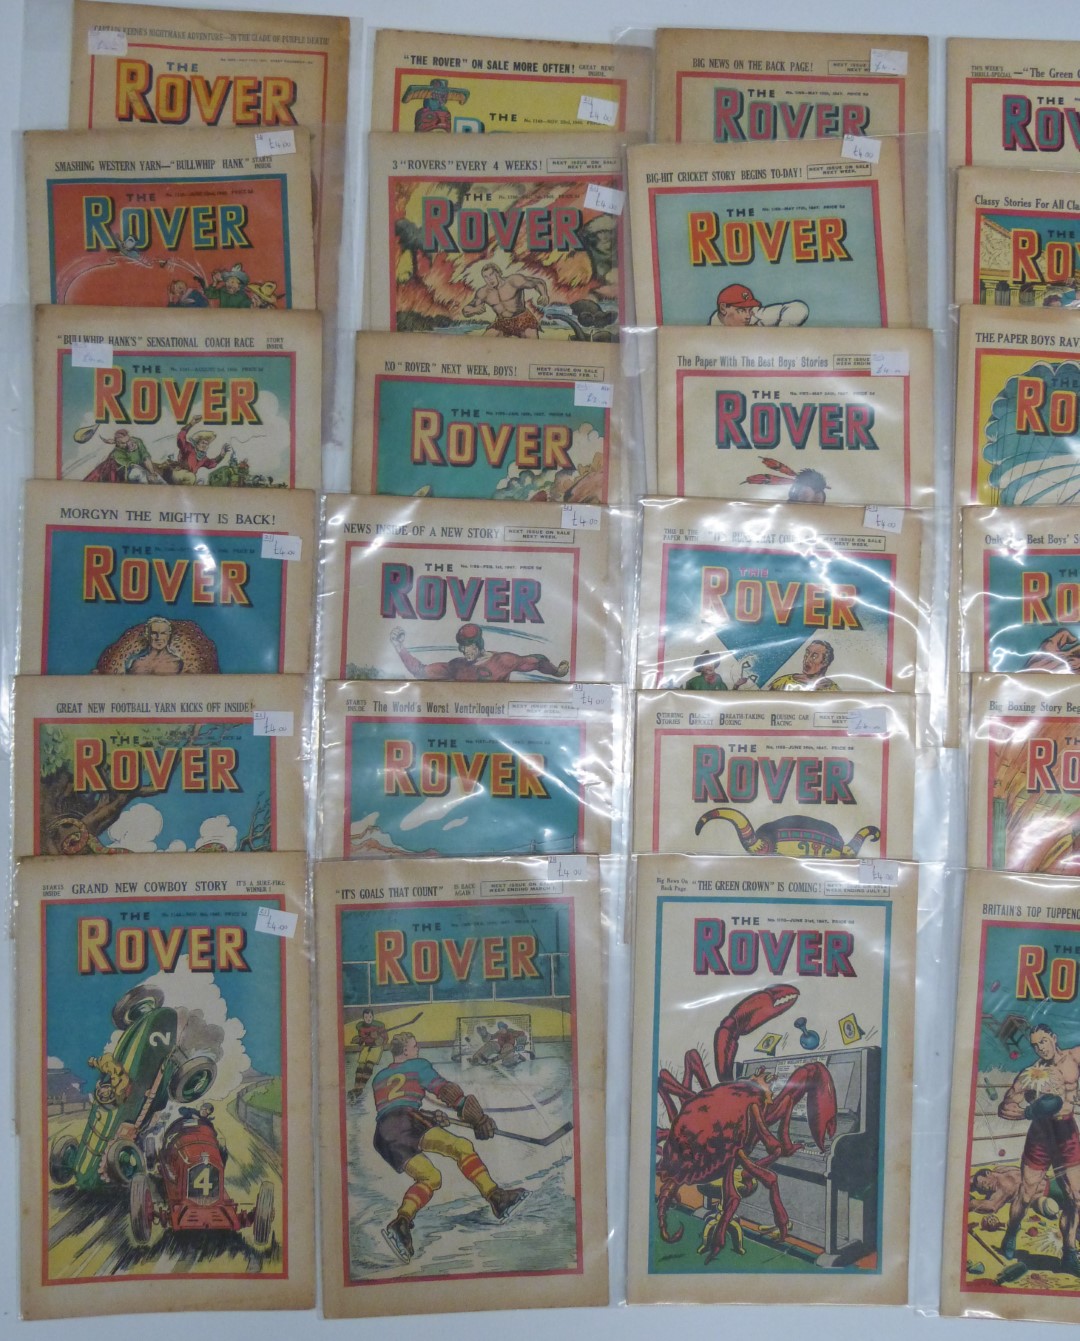 Over 100 Rover comic books dating from 1941 onwards. - Image 3 of 3